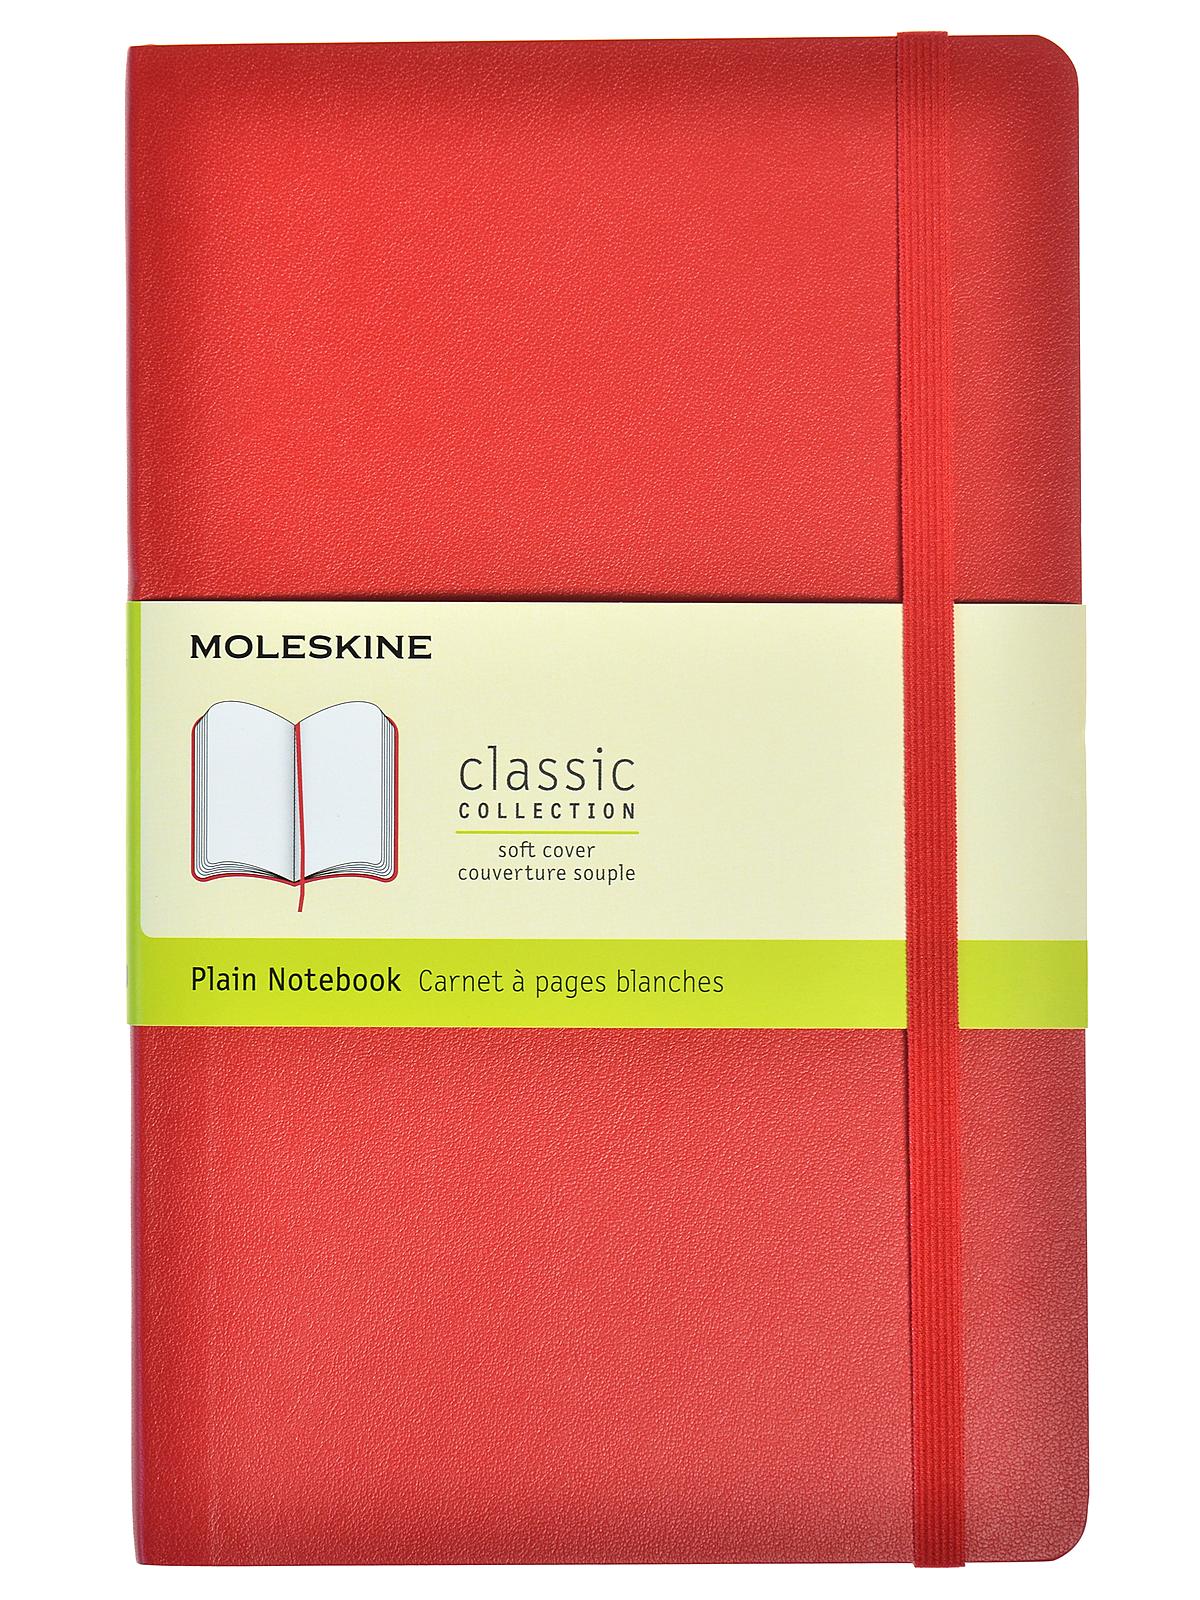 Classic Soft Cover Notebooks Red 5 In. X 8 1 4 In. 192 Pages, Unlined